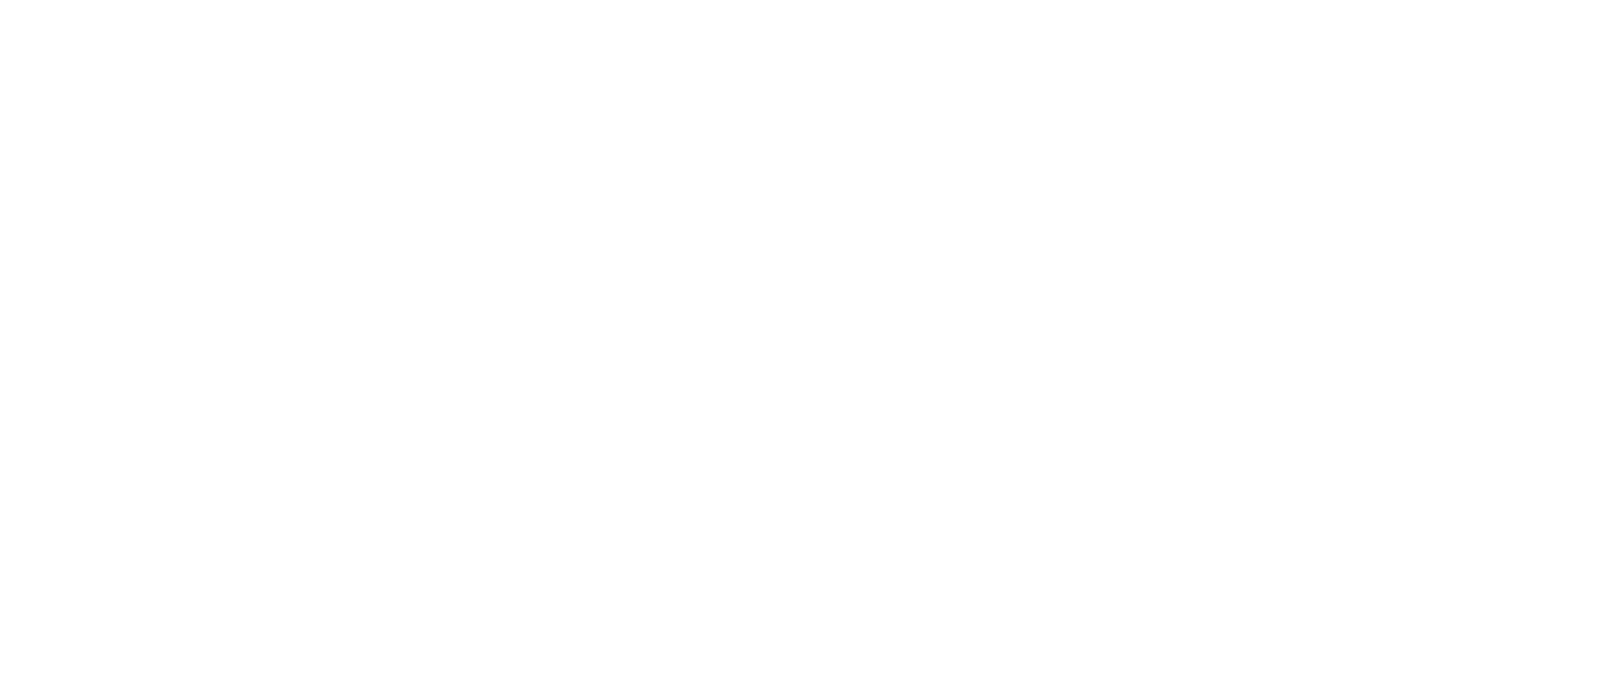 artMuria obtains awards from one of the world’s largest and most trusted food and drink